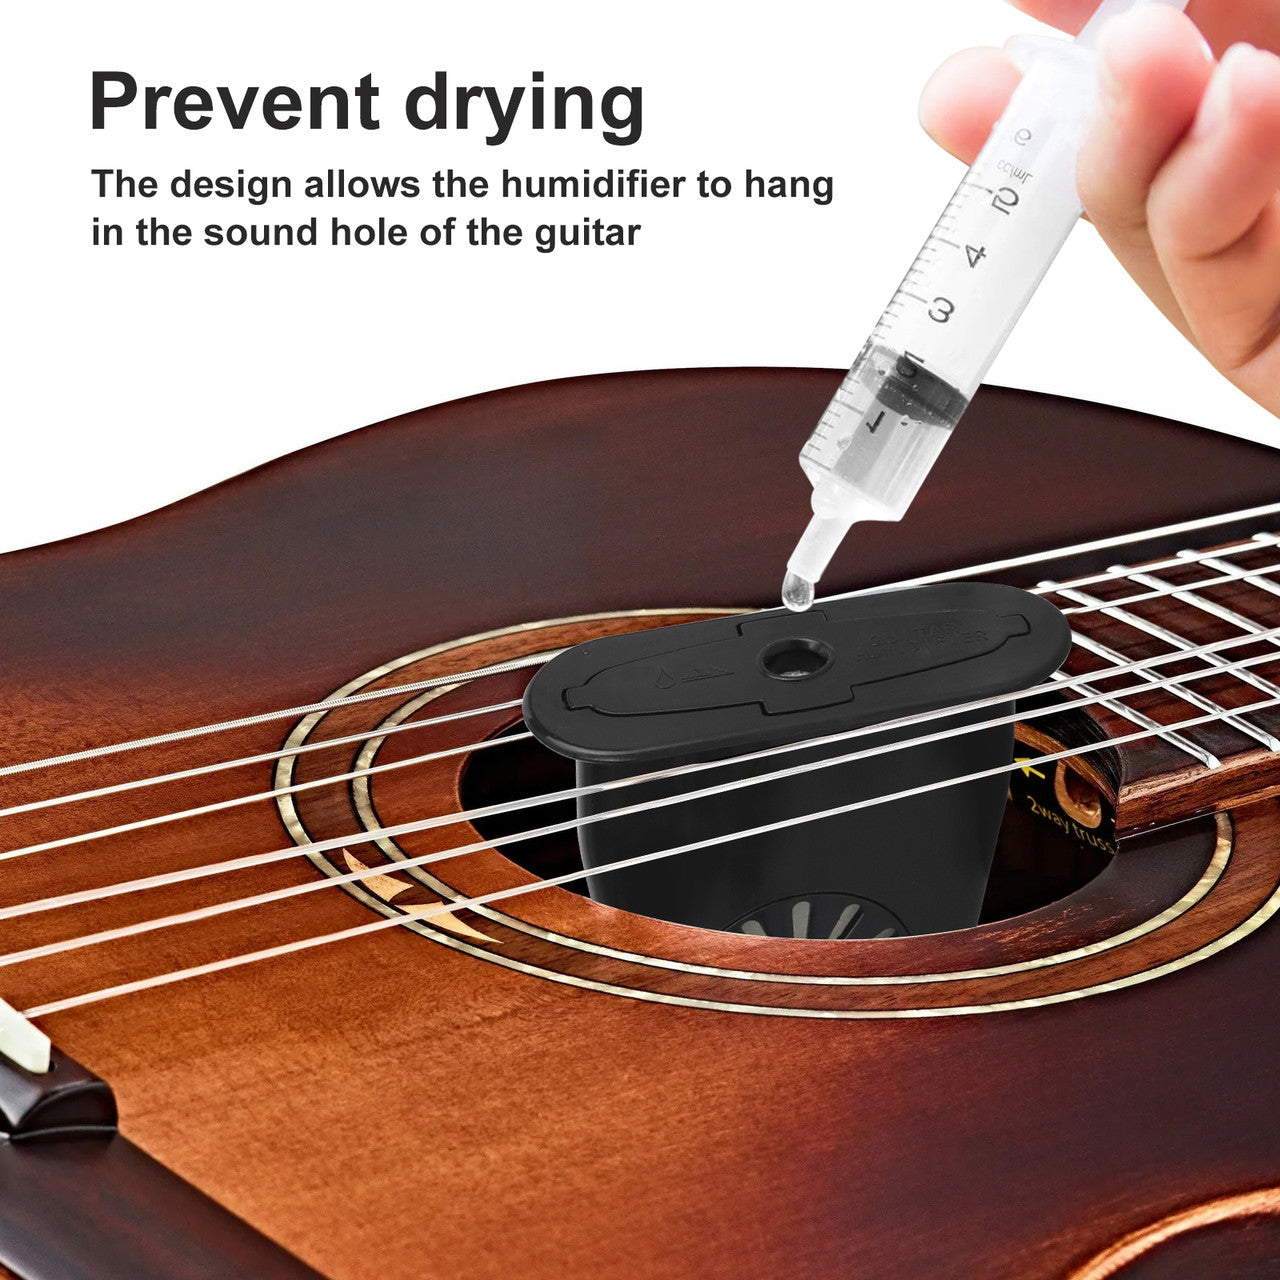 Non-Drip Design Guitar Humidifier with Good Protection without worry of Damage, 2PCS